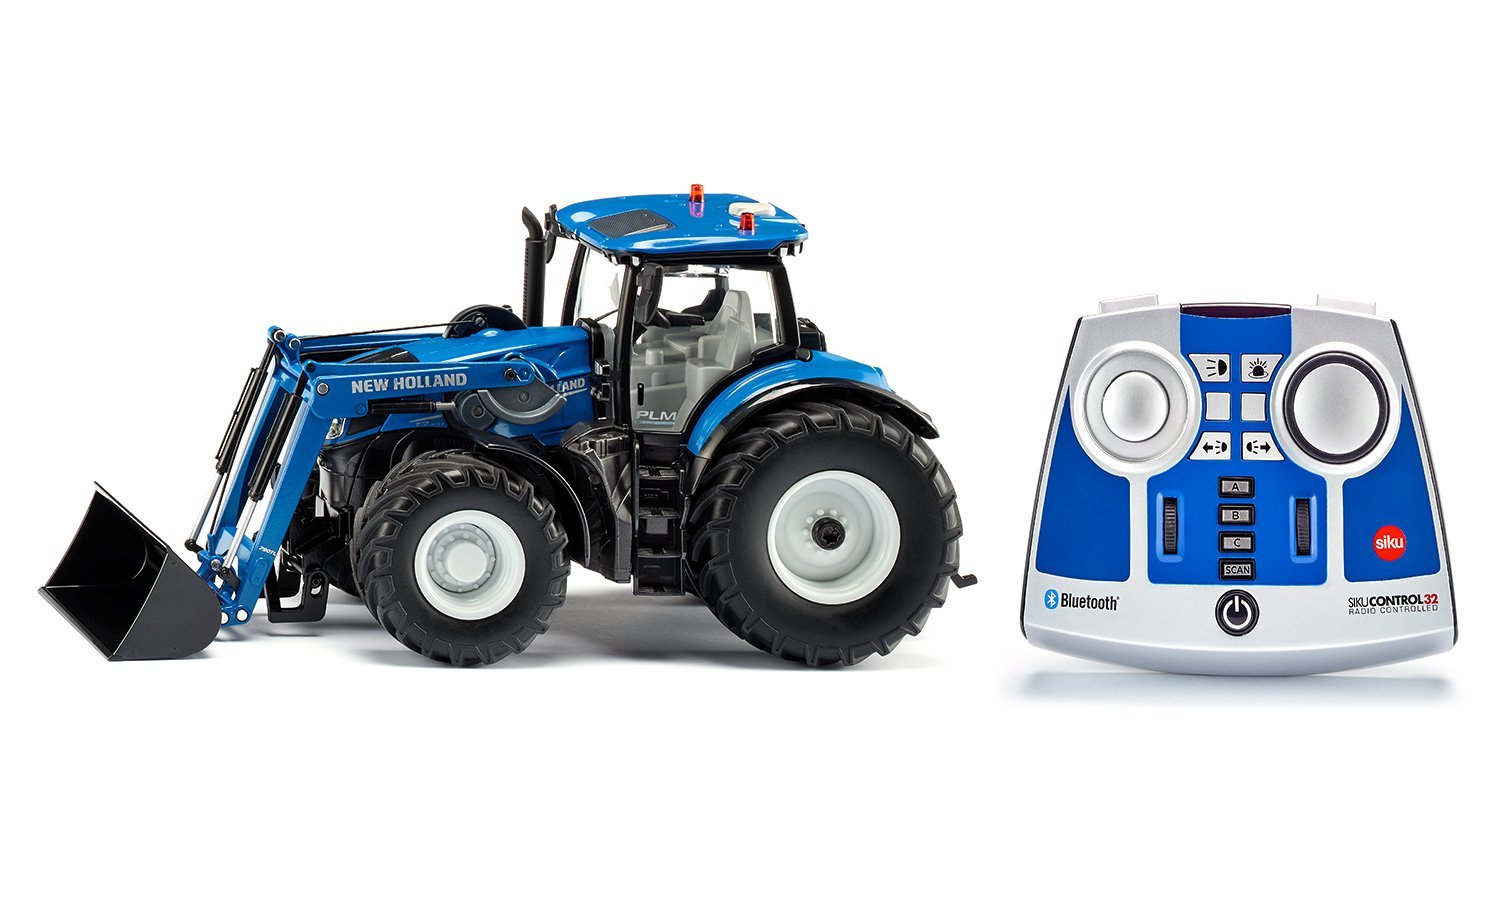 New Holland T7.315 with front loader, Bluetooth app control and remote control unit